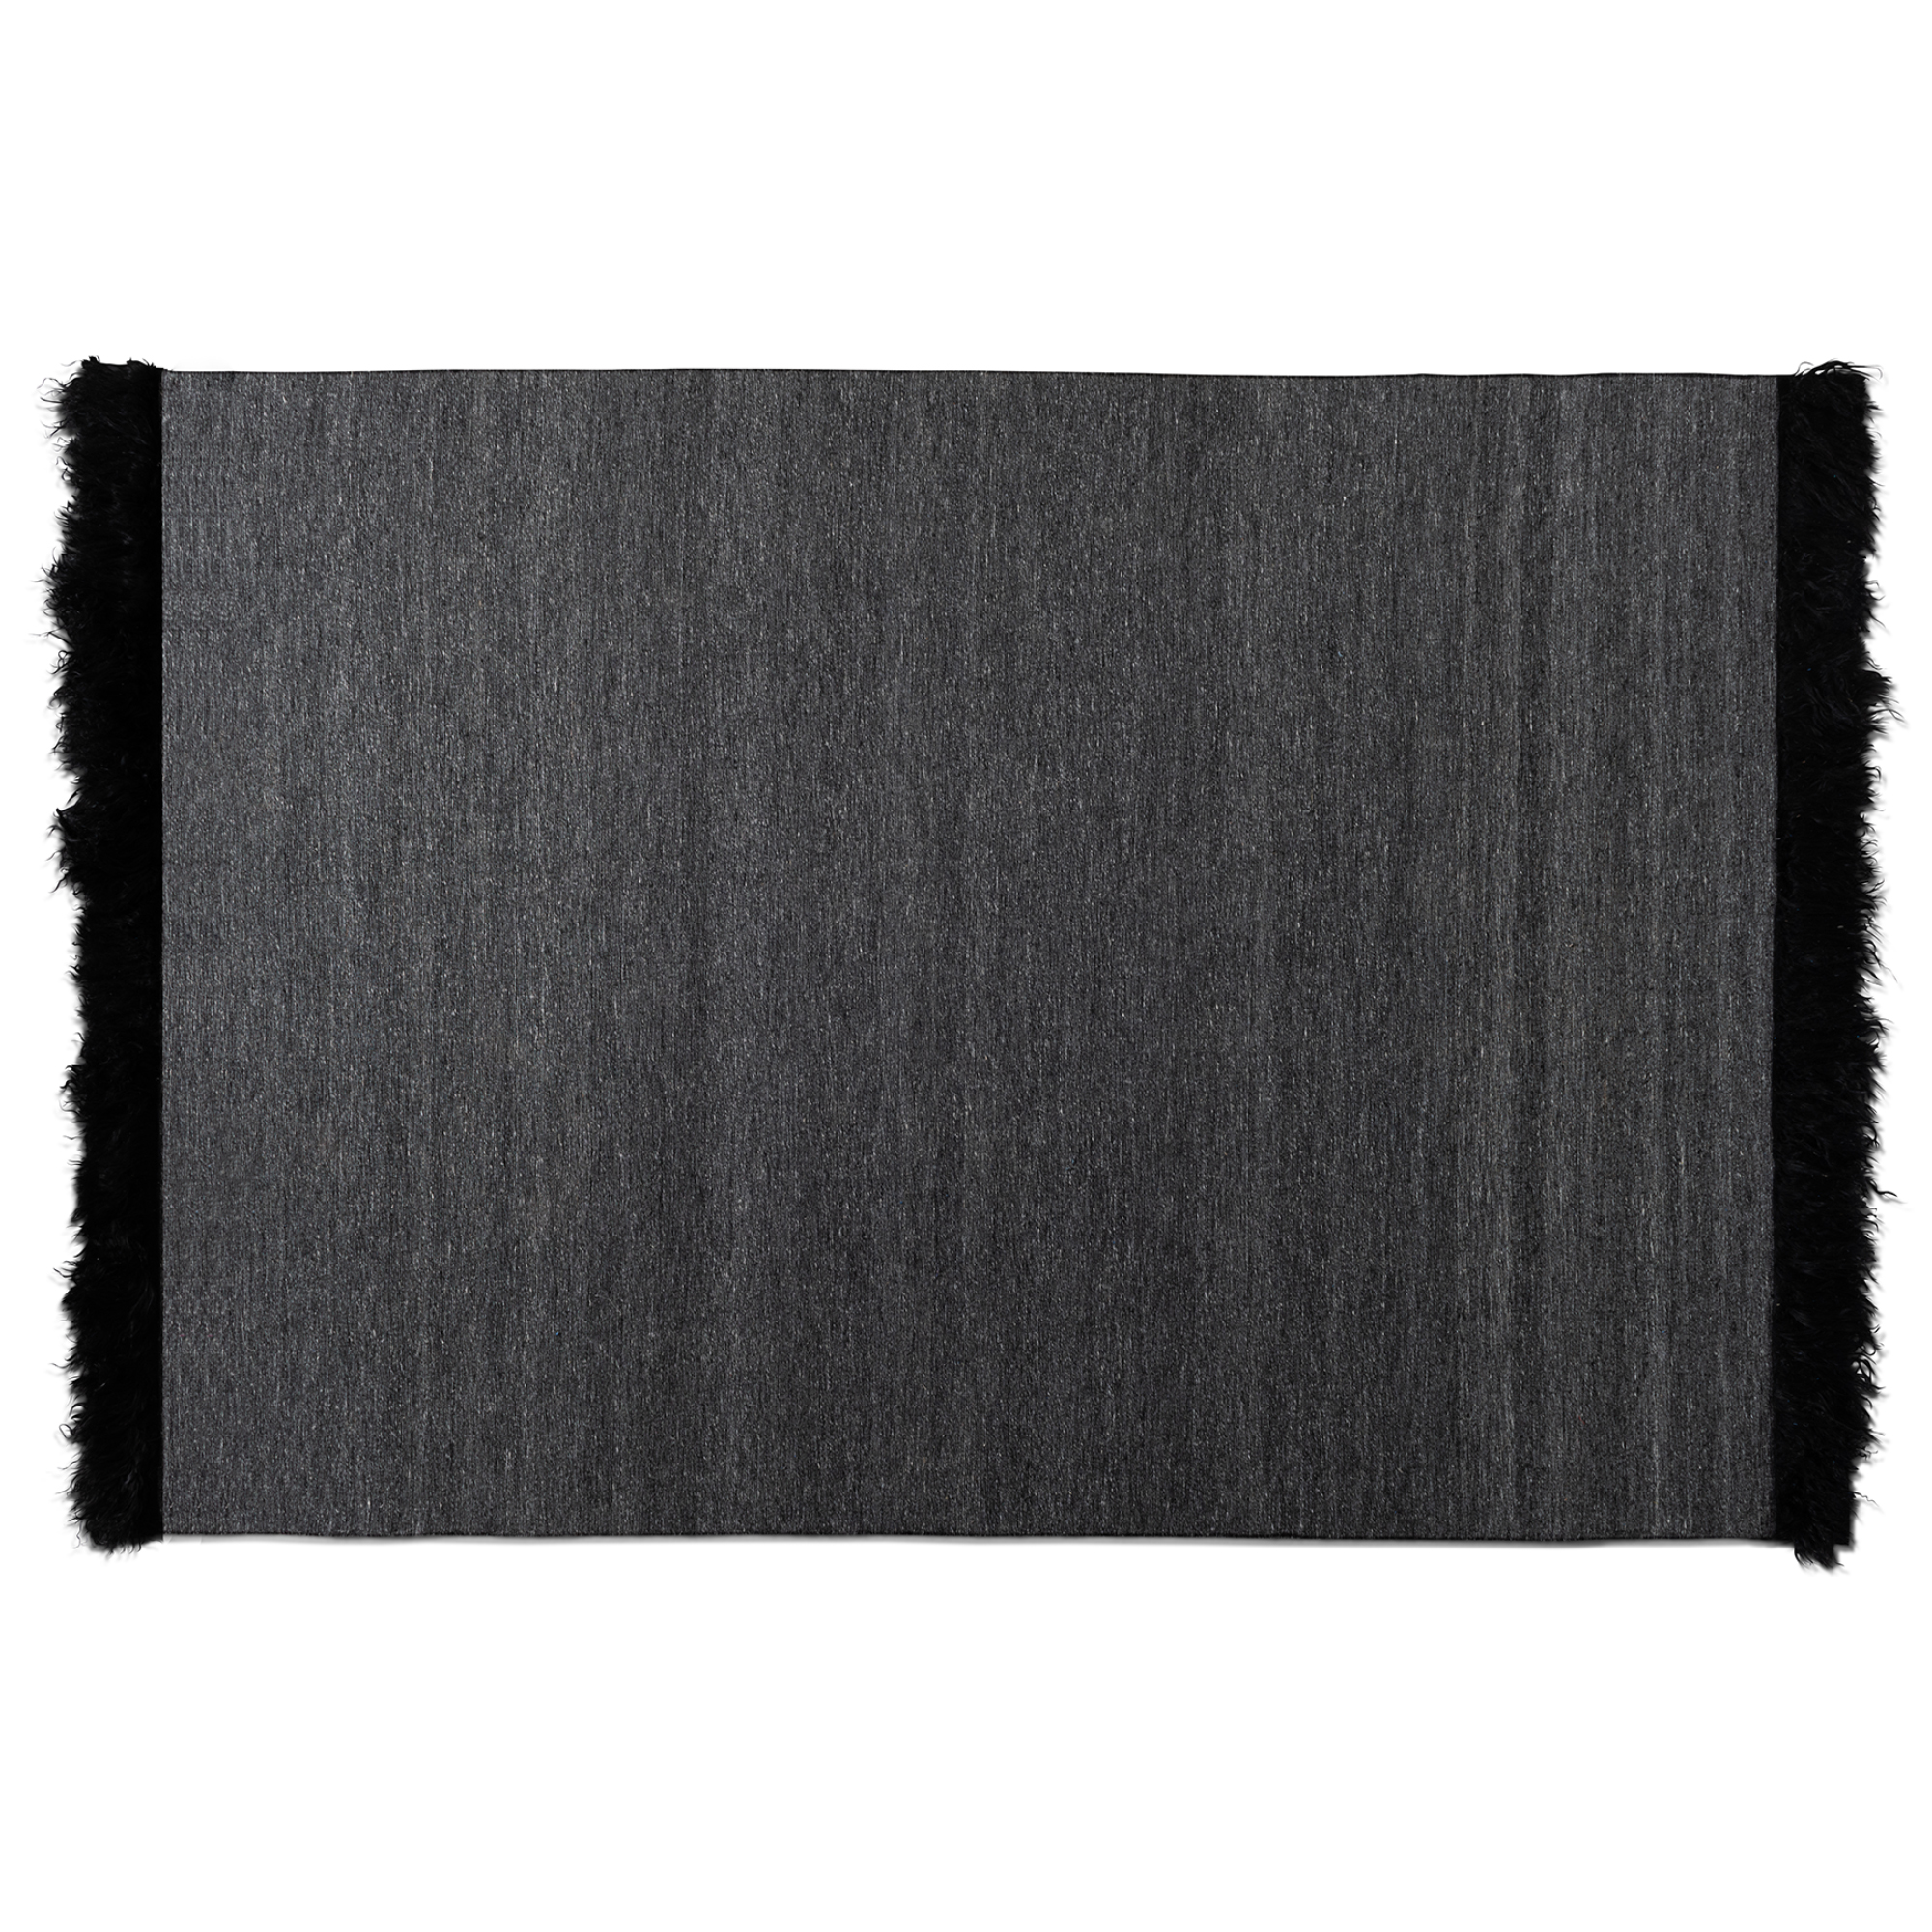 Baxton Studio Dalston Modern and Contemporary Dark Grey and Black Handwoven Wool Blend Area Rug